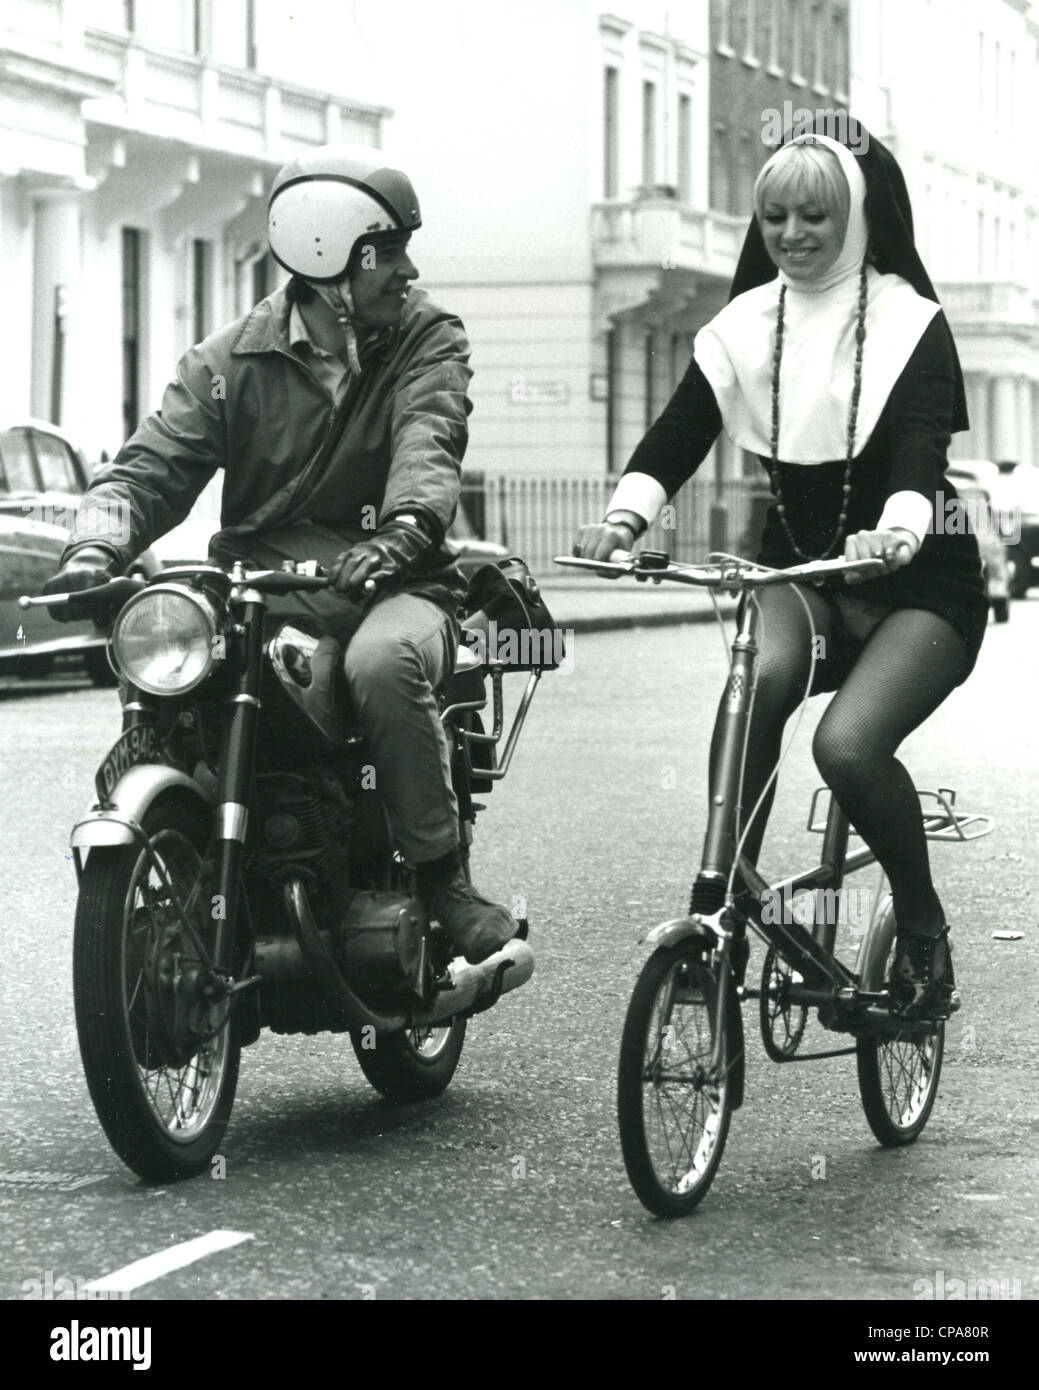 CYCLING NUN (posed by model) Photo Tony Gale Stock Photo